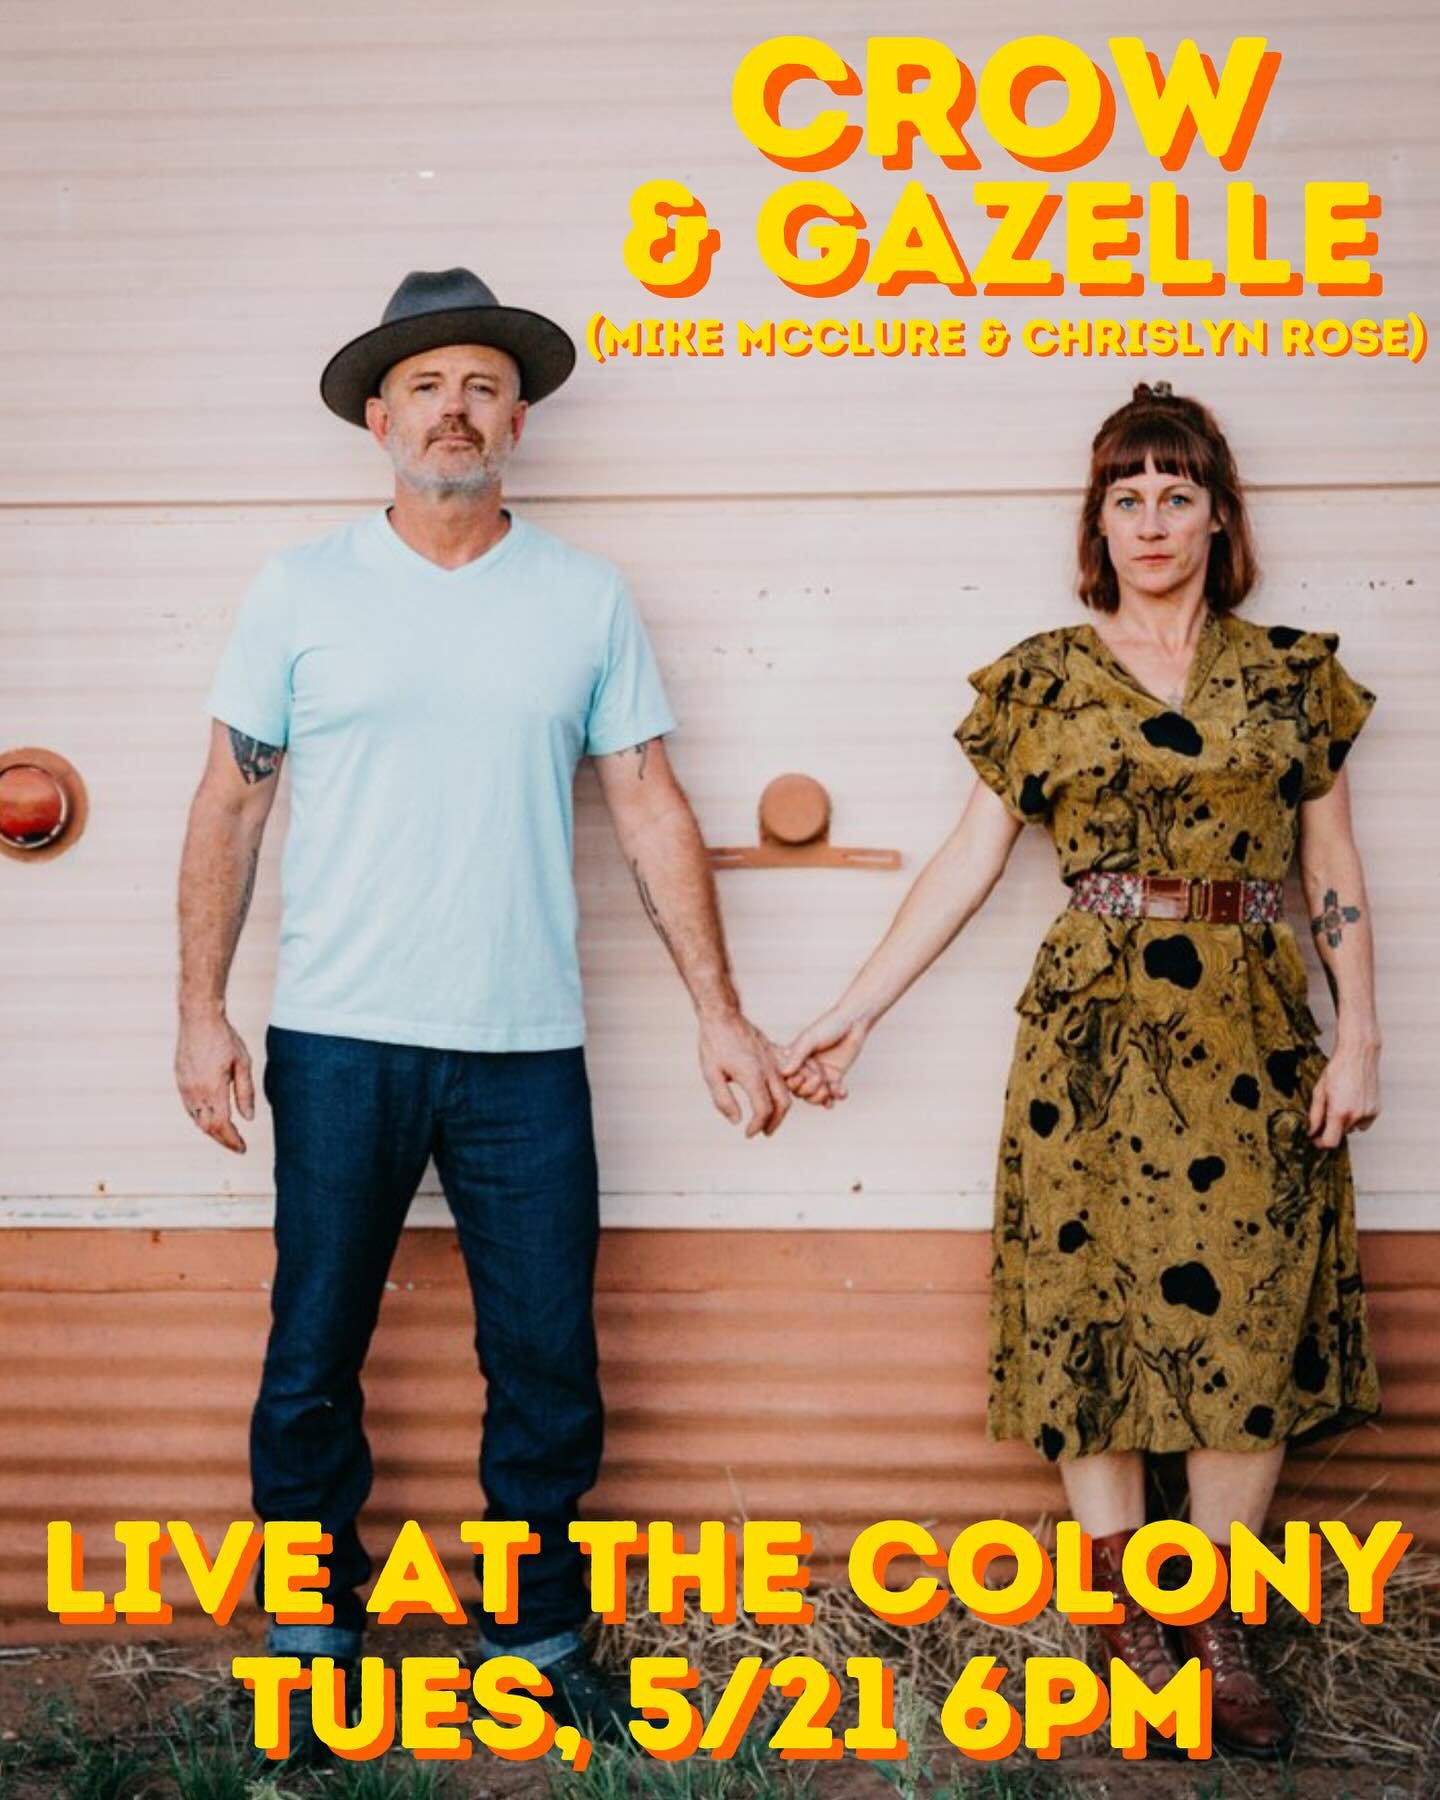 We&rsquo;re excited to announce Crow and Gazelle will be performing this Tuesday before @cartersampson! Mike McClure is an Oklahoma Hall of Fame inductee and Chrislyn Rose is a musician and a poet who was a featured poet at the Woody Guthrie Festival